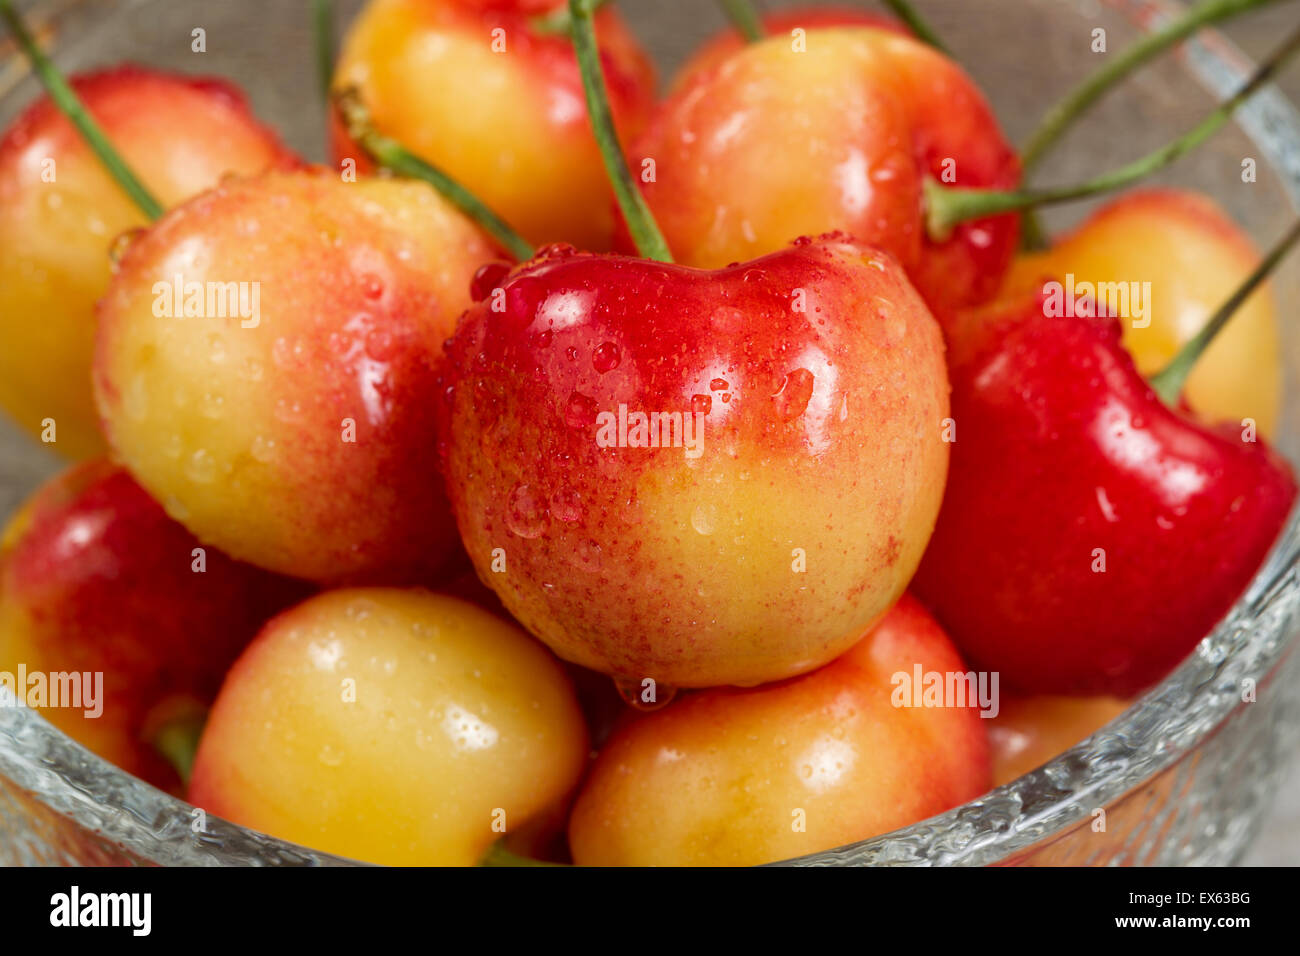 Close up fresh Rainier cherries, focus on cherry in front, in glass bowl. Washington State produce during early summer season. Stock Photo